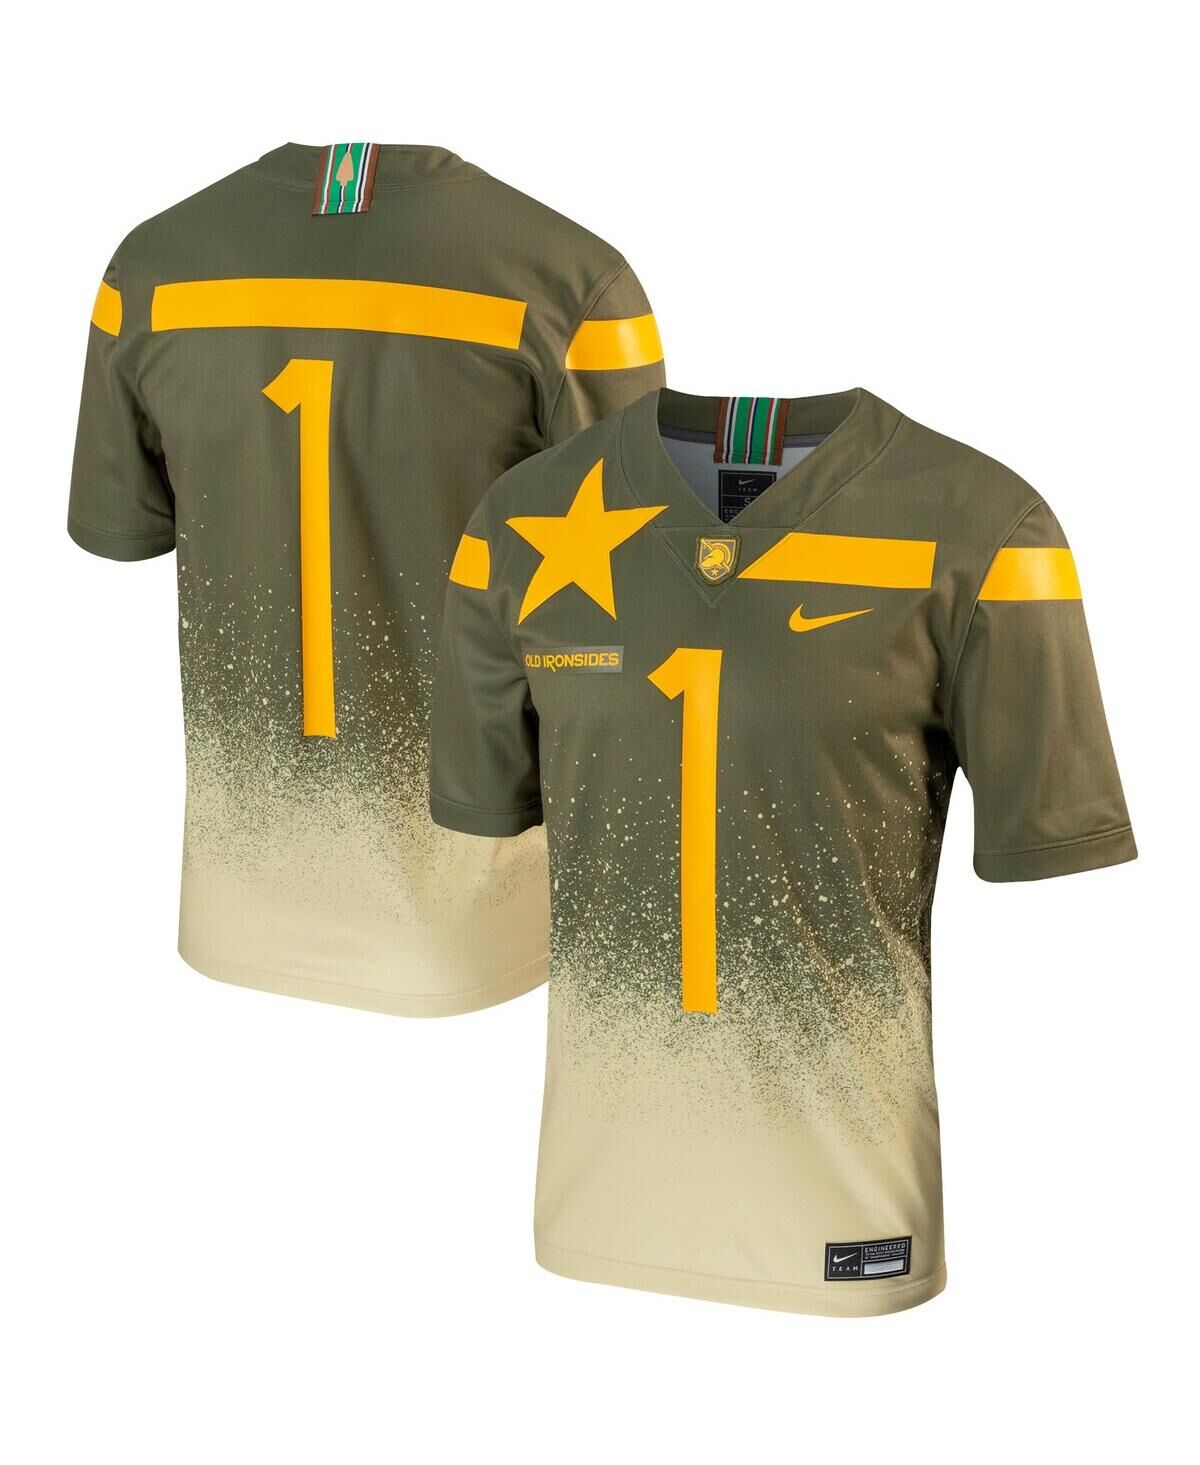 Nike Men's Nike #1 Olive Army Black Knights 1st Armored Division Old Ironsides Untouchable Football Jersey - Olive